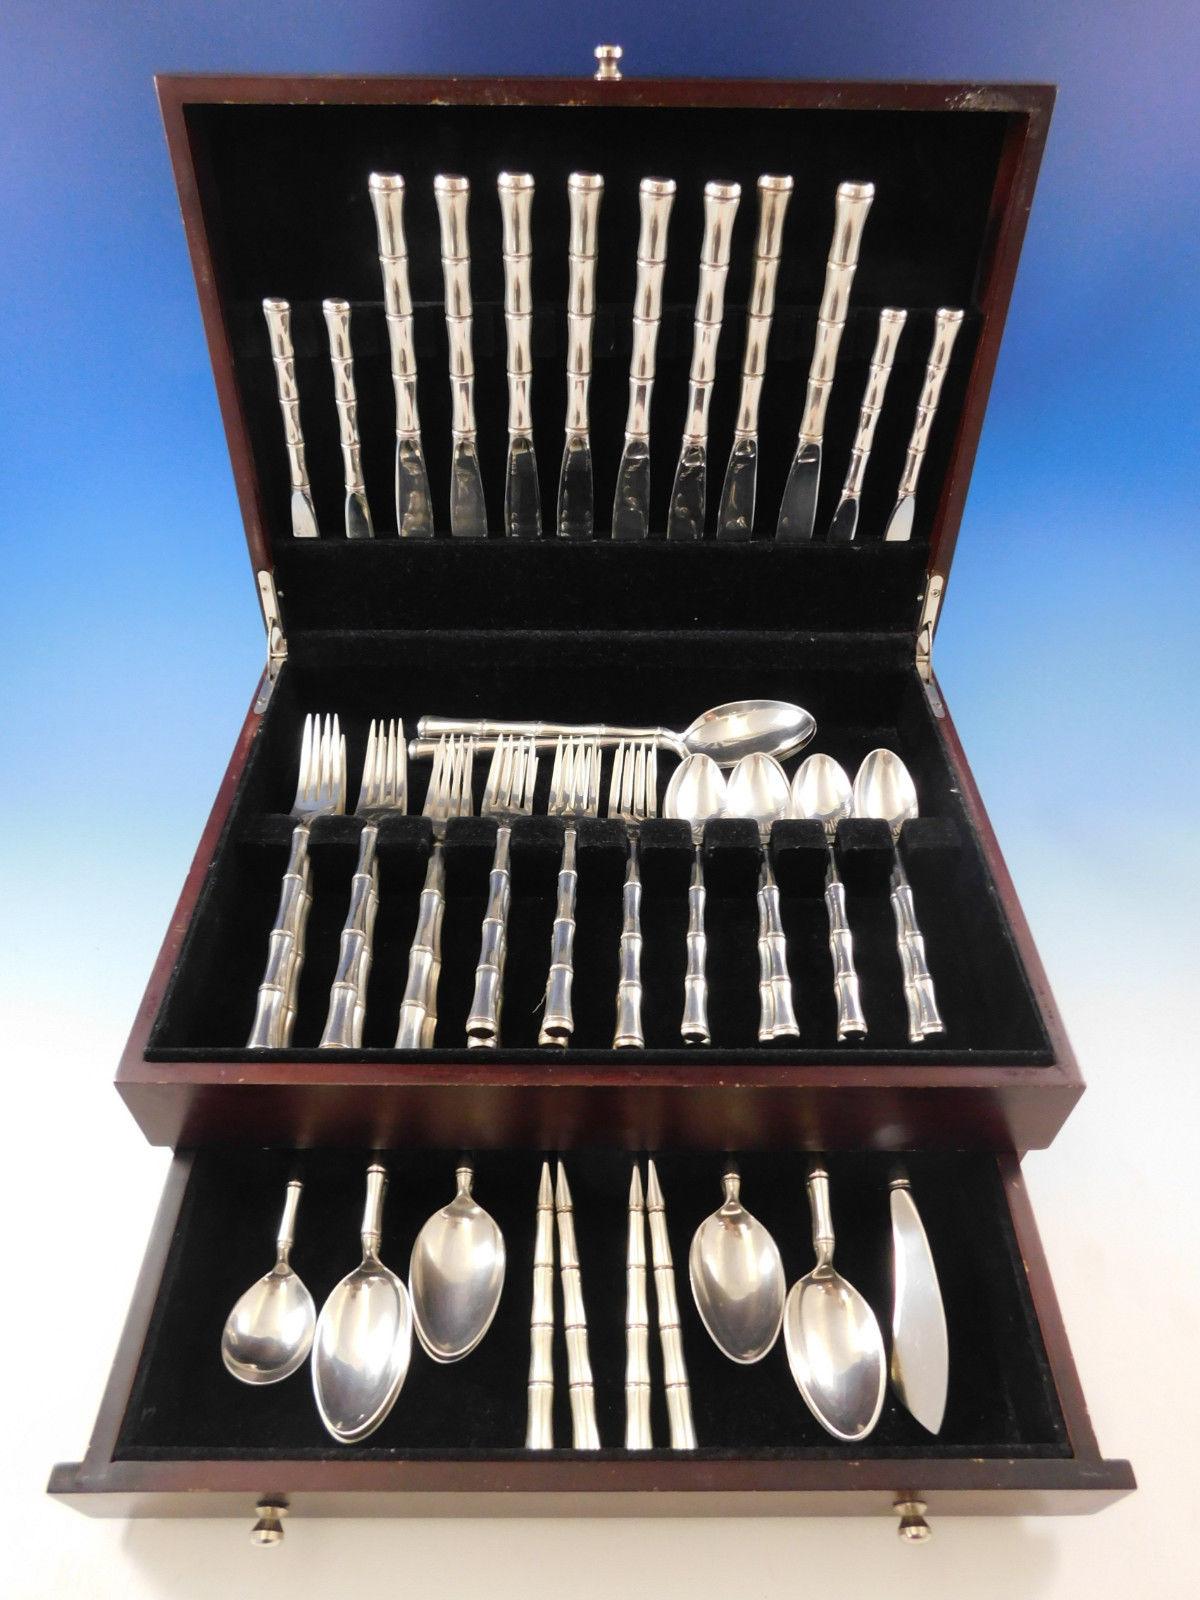 Mandarin by Towle sterling silver flatware set, 52 pieces. This chinoiserie style flatware service features hollow 3-D bamboo pattern handles. This set includes:

8 knives, 9 1/8